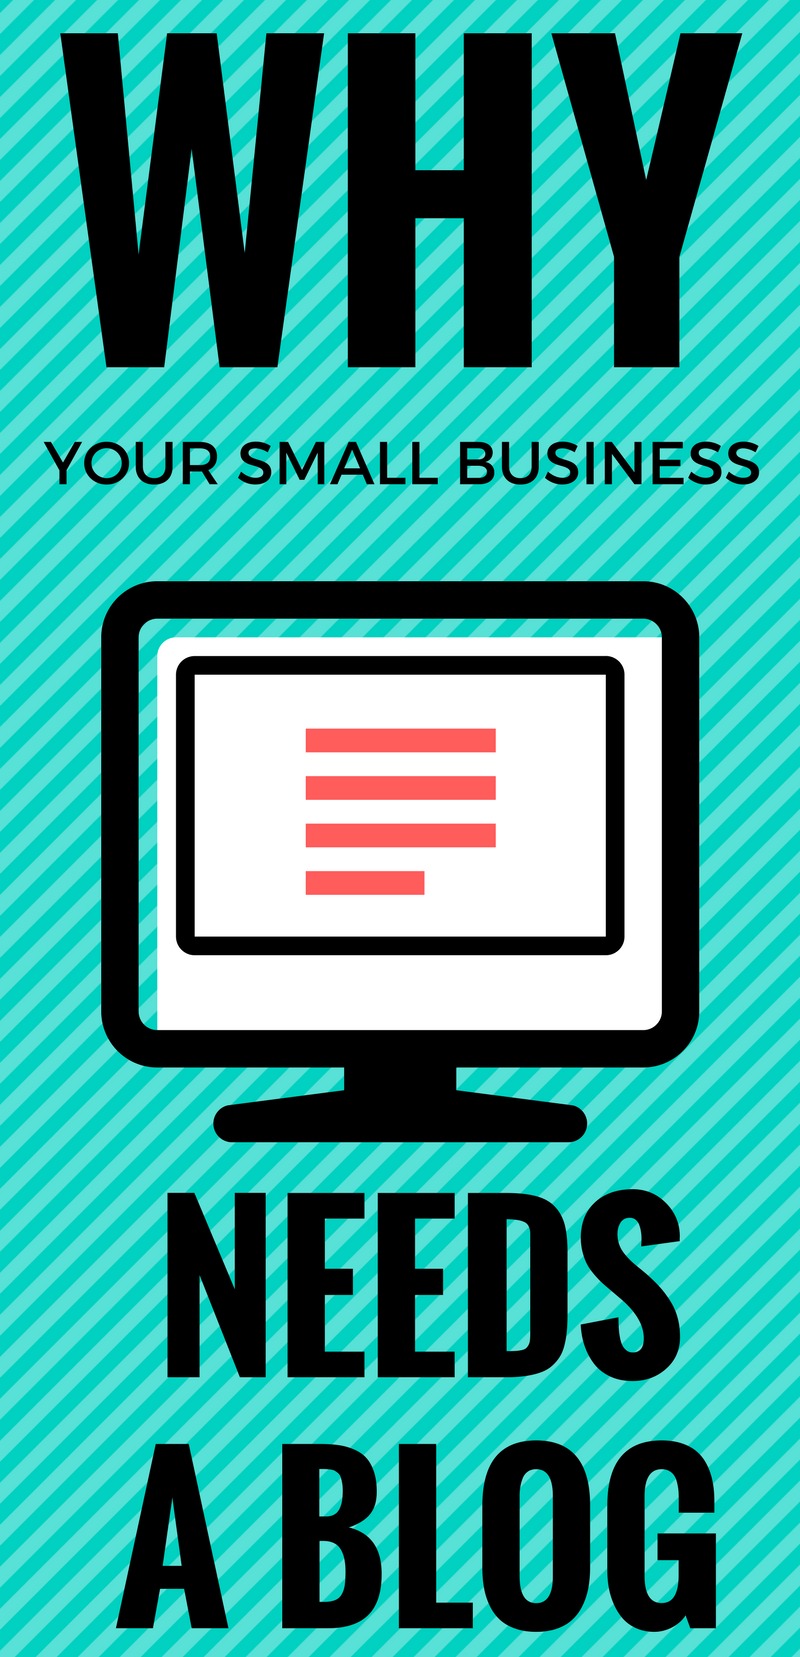 Why your small business needs a blog